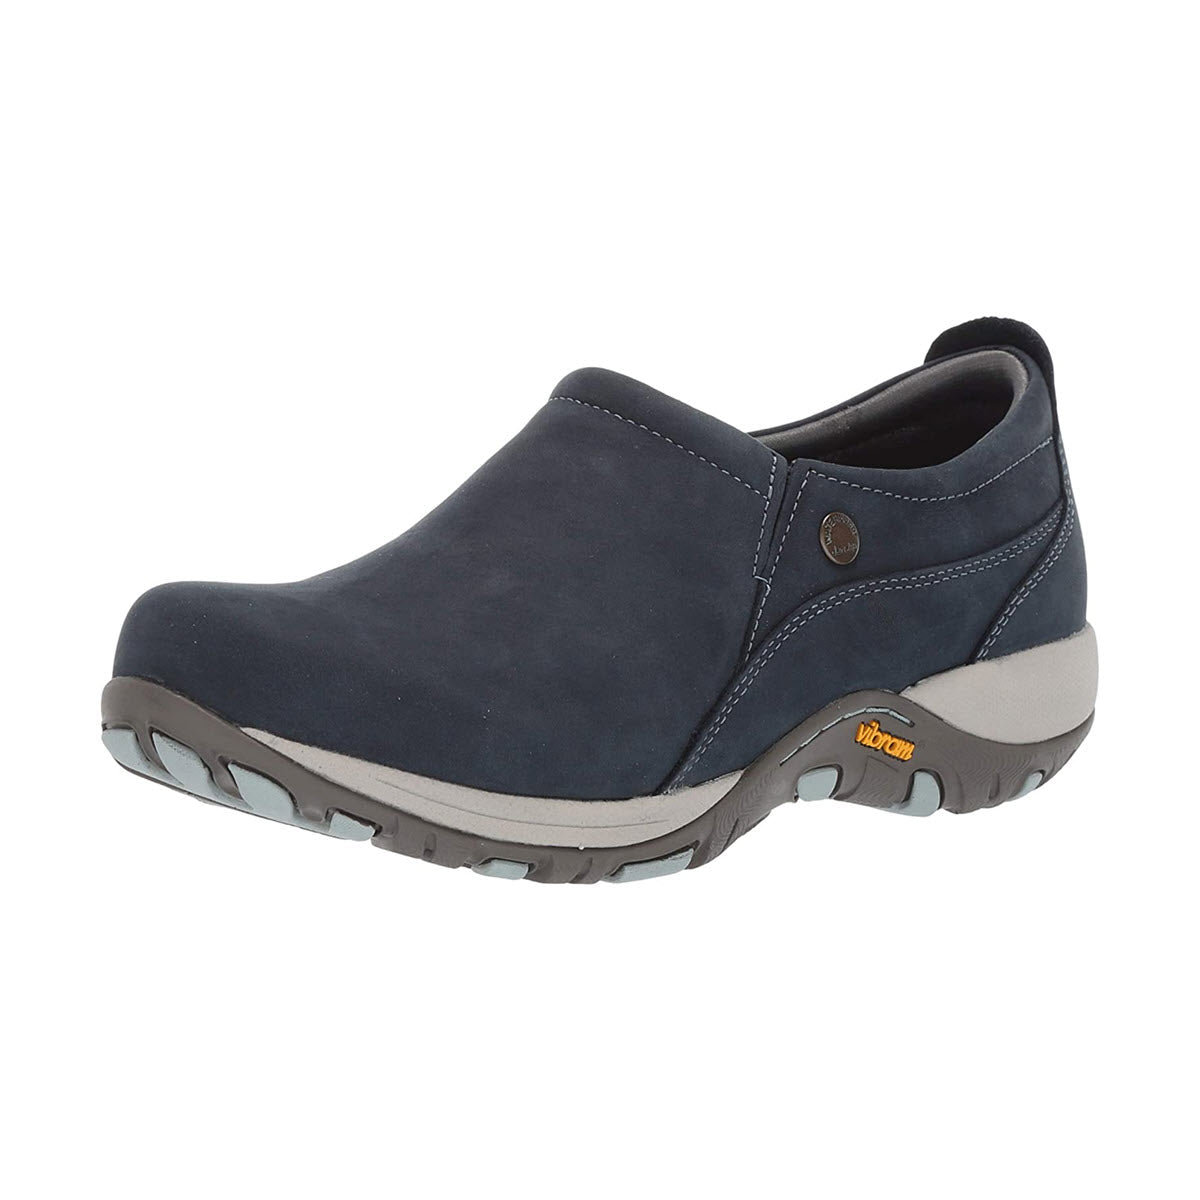 Dansko navy blue slip-on casual shoe with a button detail and a waterproof leather gray sole.